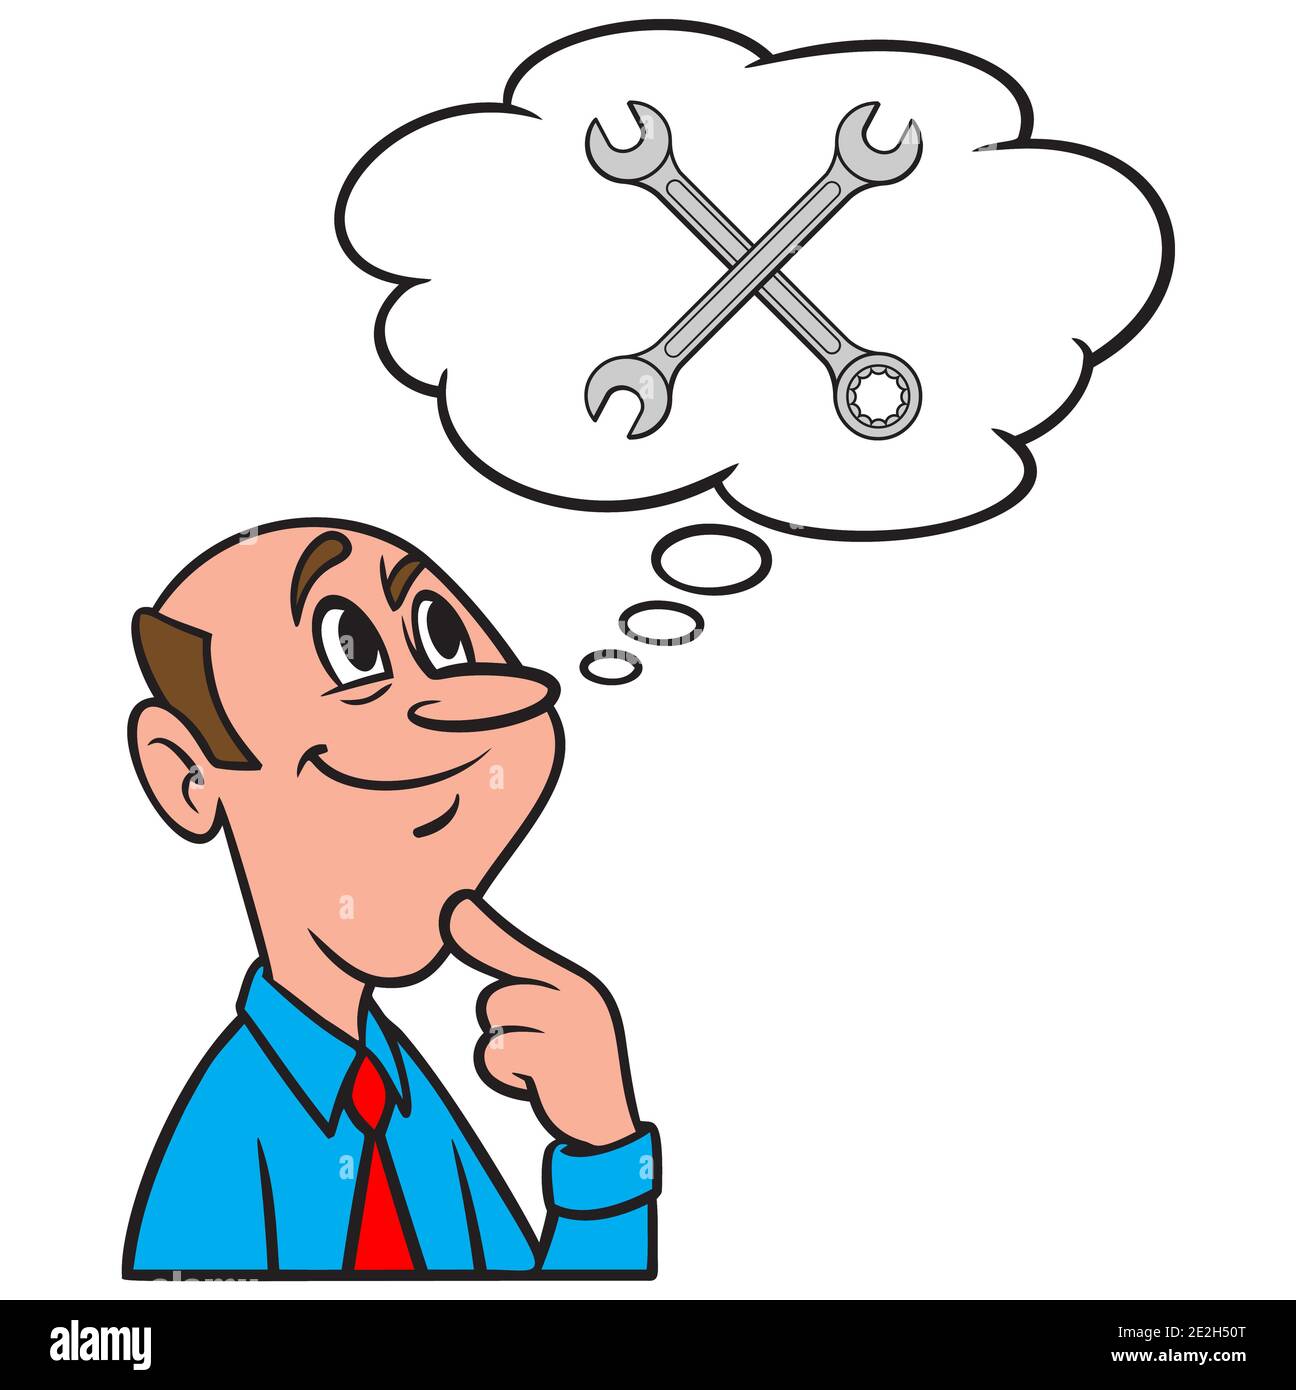 Thinking about Open Ended Wrenches - A cartoon illustration of a man thinking about becoming a Mechanic. Stock Vector